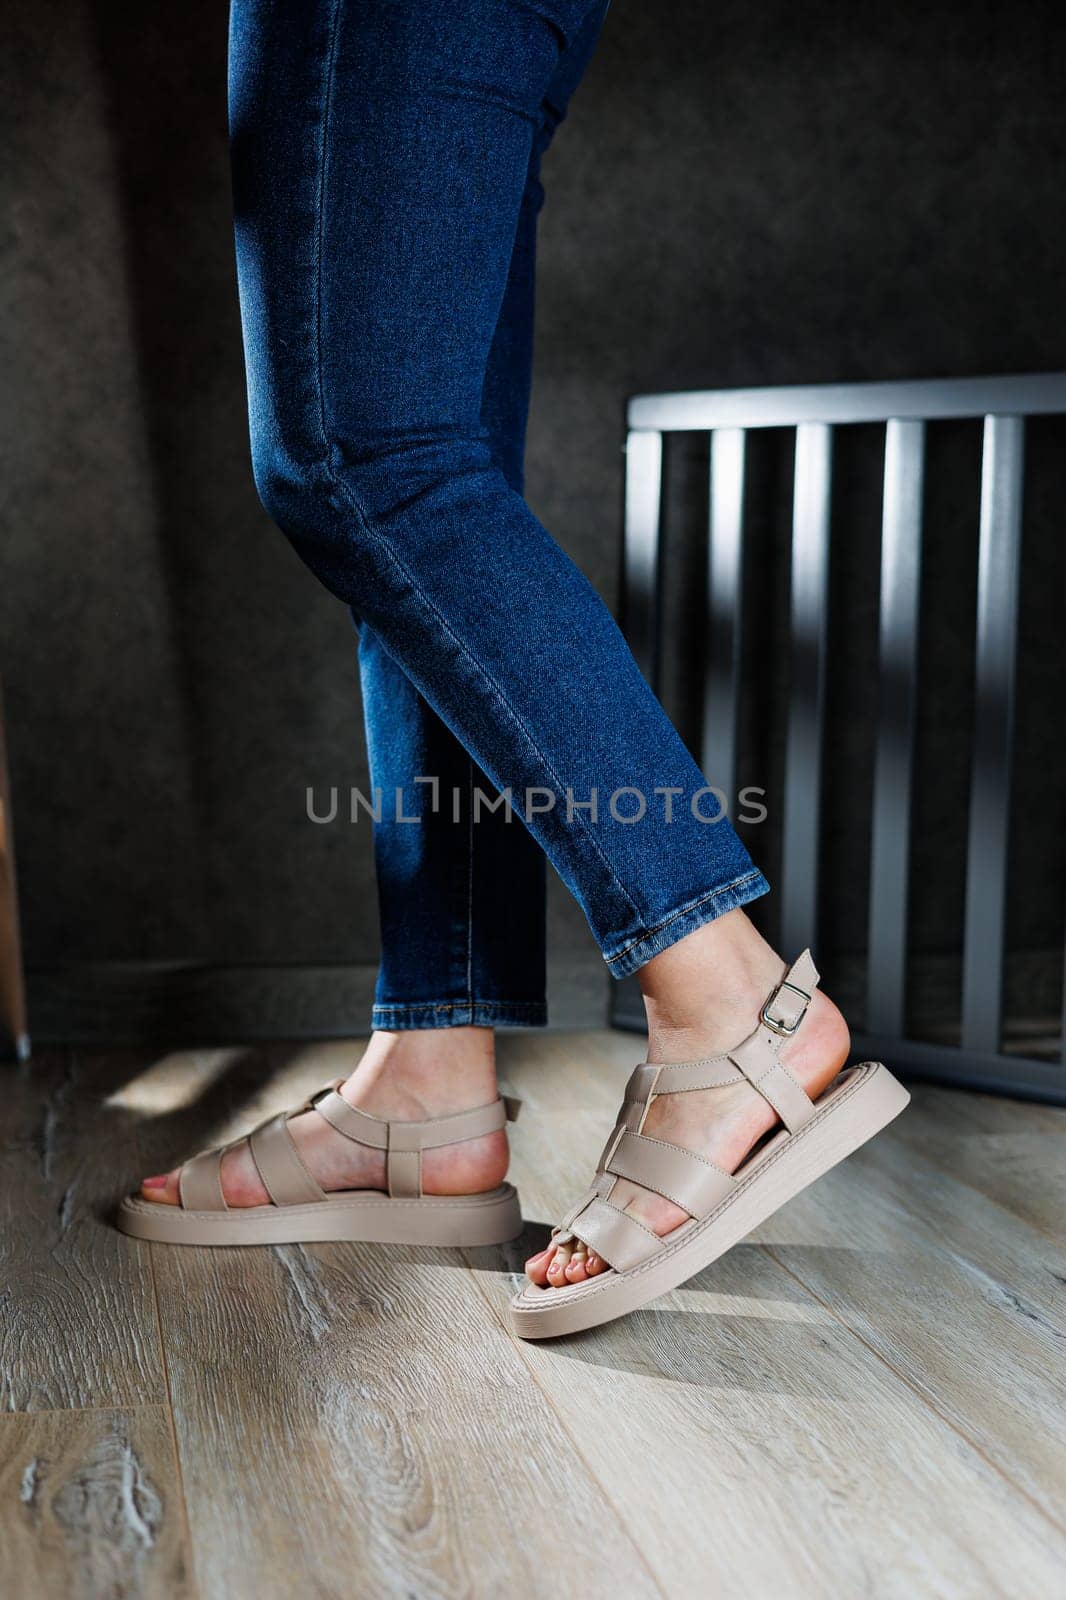 Collection of women's leather summer sandals. Slender female legs in beige leather sandals without heels. by Dmitrytph